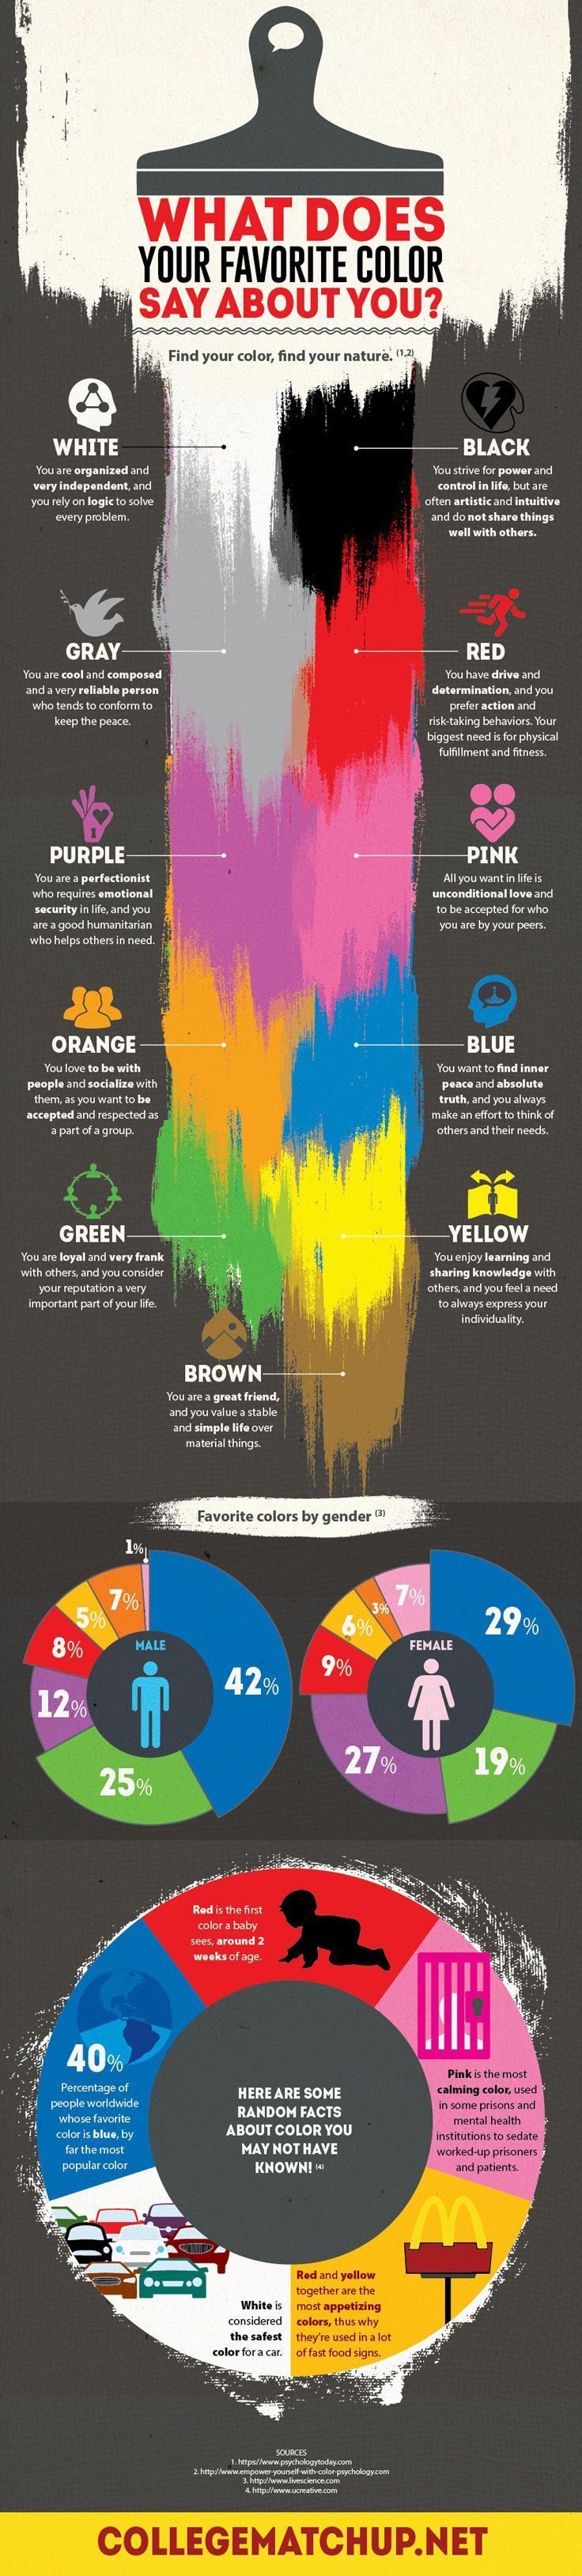 1532492371_954_Marketing-Infographic-Got-a-favorite-color-Well-what-does-your-favorite-color-say-about-you-Check-t Marketing Infographic : Got a favorite color? Well, what does your favorite color say about you? Check t...